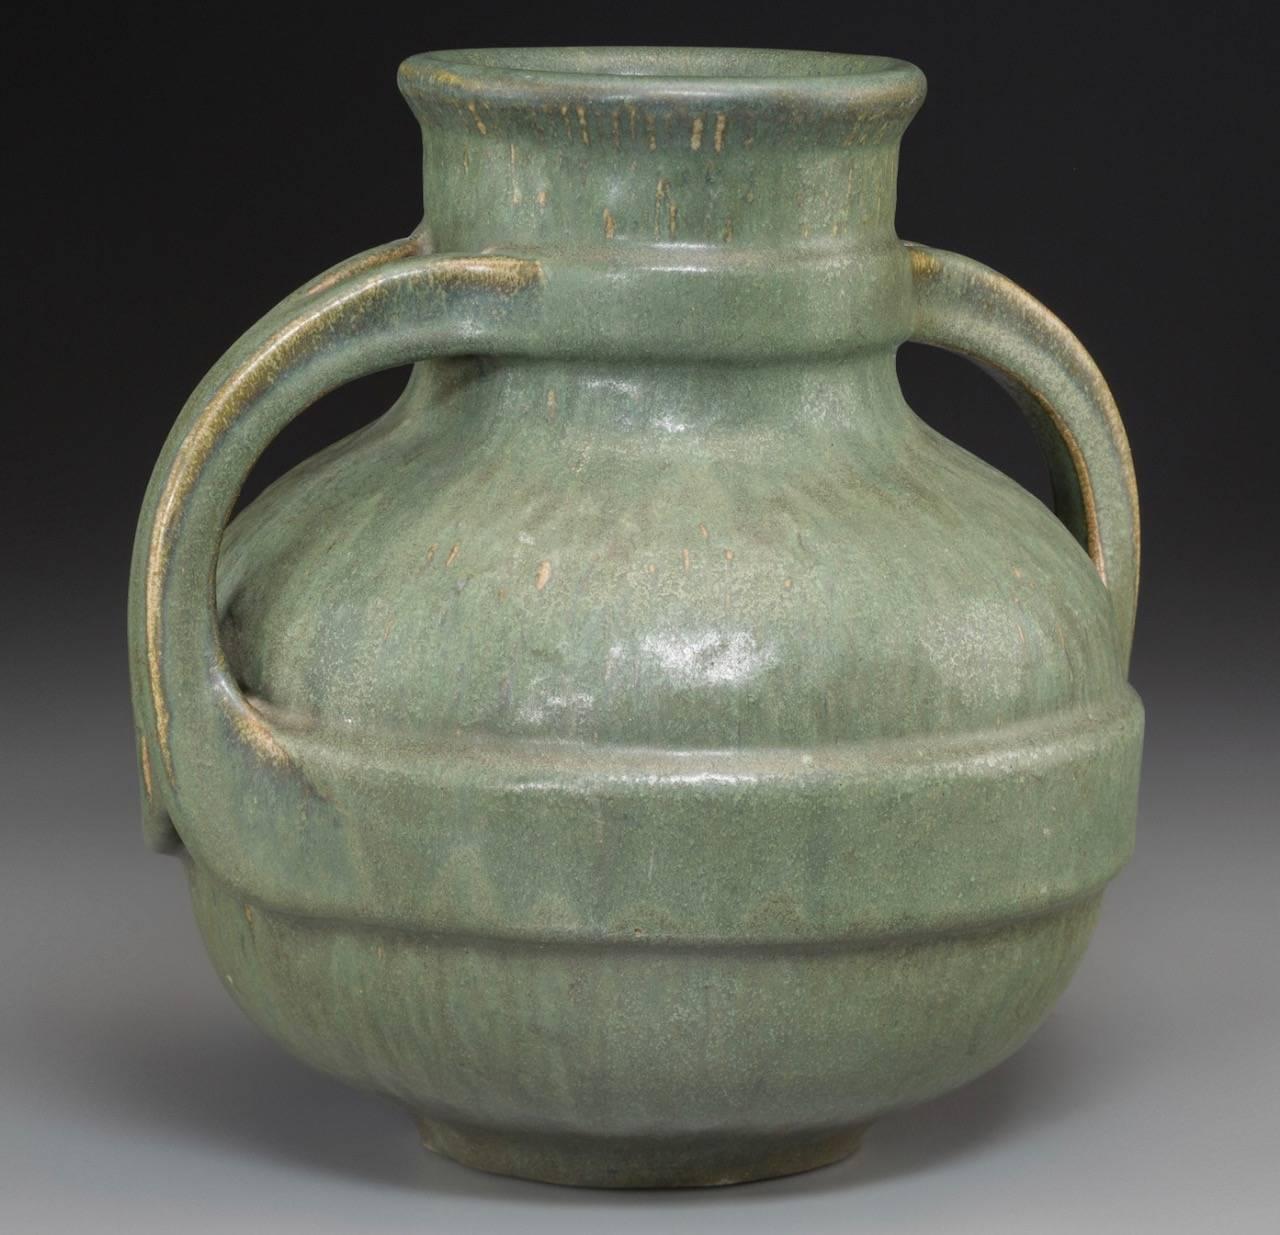 An early and fine Fulper pottery Arts & Crafts green hammered ceramic two-handled vase. Very fat and heavy.

Measures: Height 8.8 inches (22.2 cm)
Width 9 inches (22.5 cm)

Marked: FULPER

Condition: Excellent with wear commensurate of age